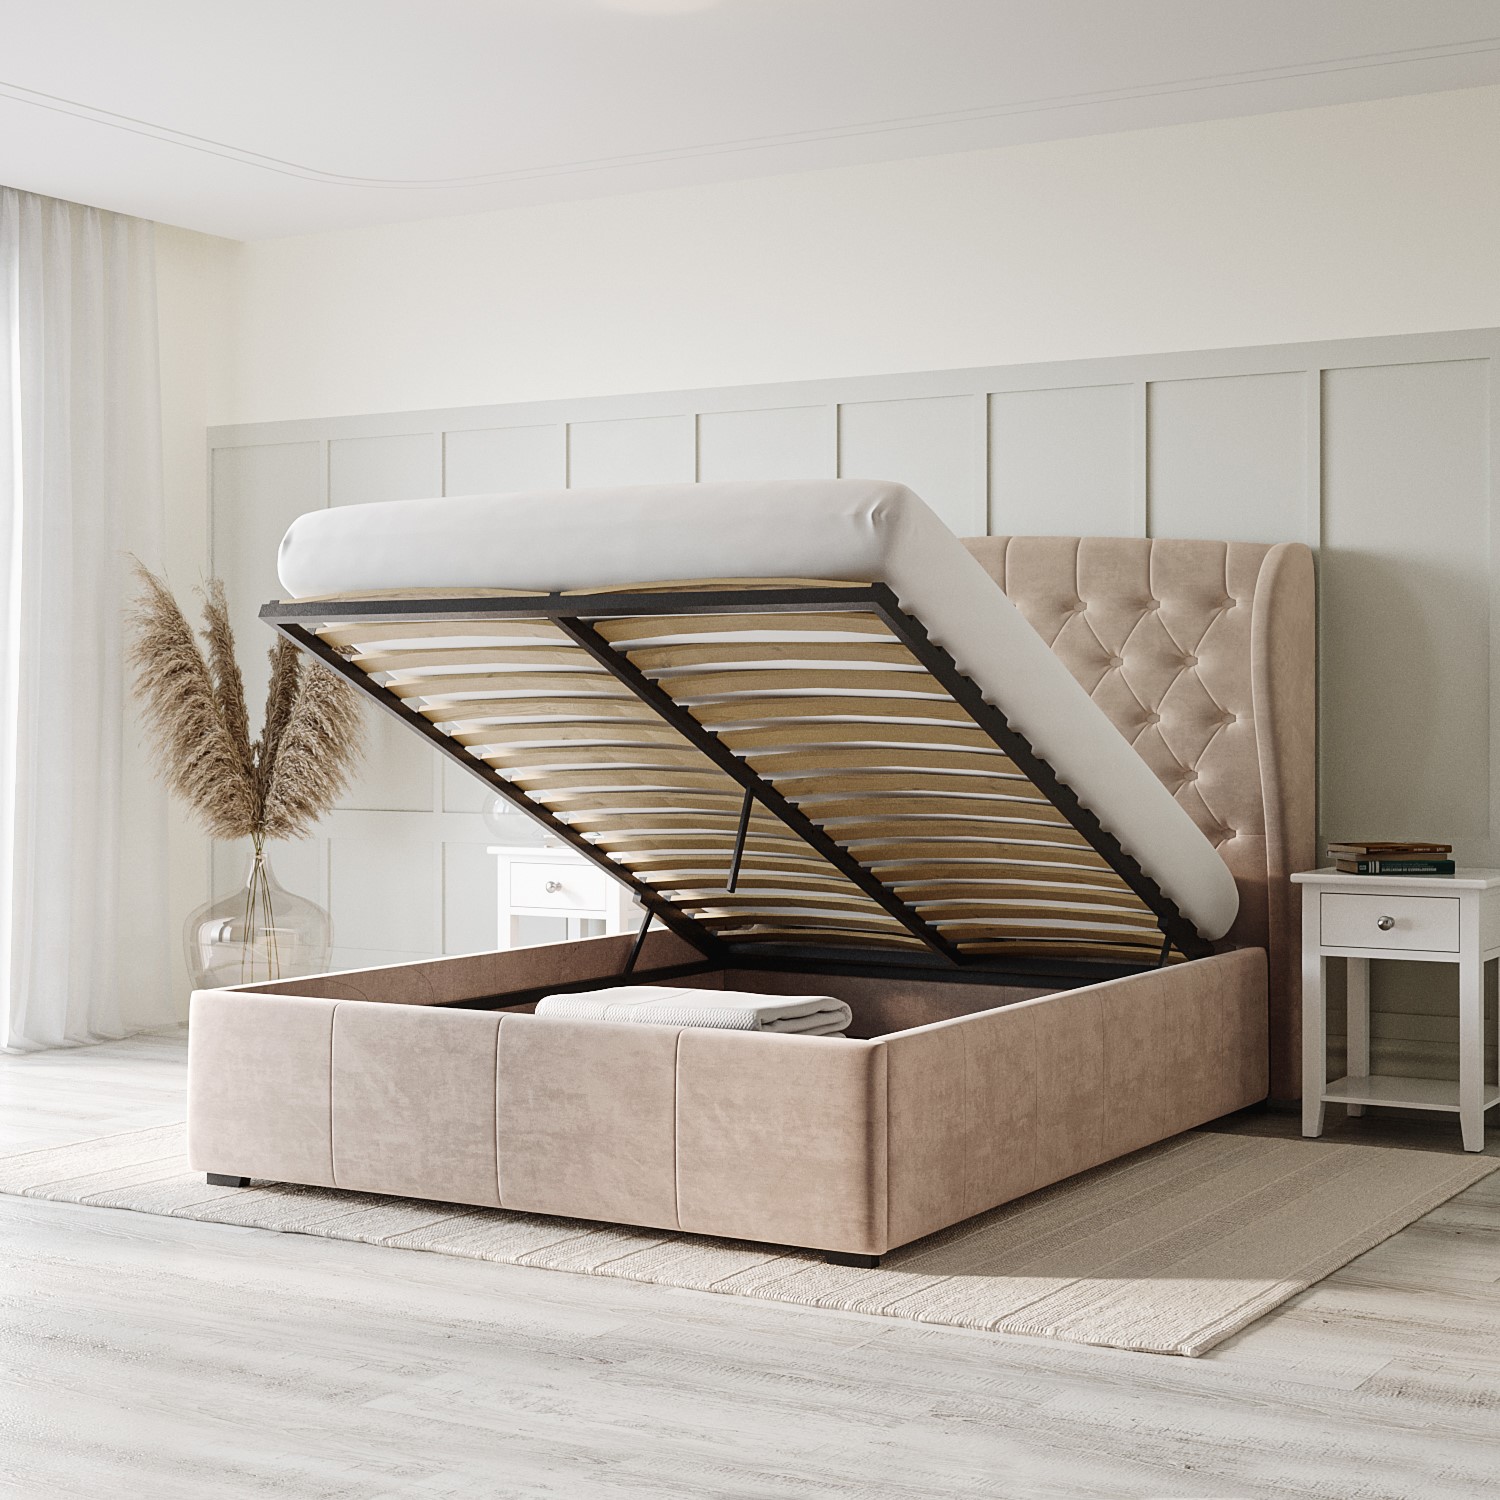 Read more about Beige velvet double ottoman bed with winged headboard safina